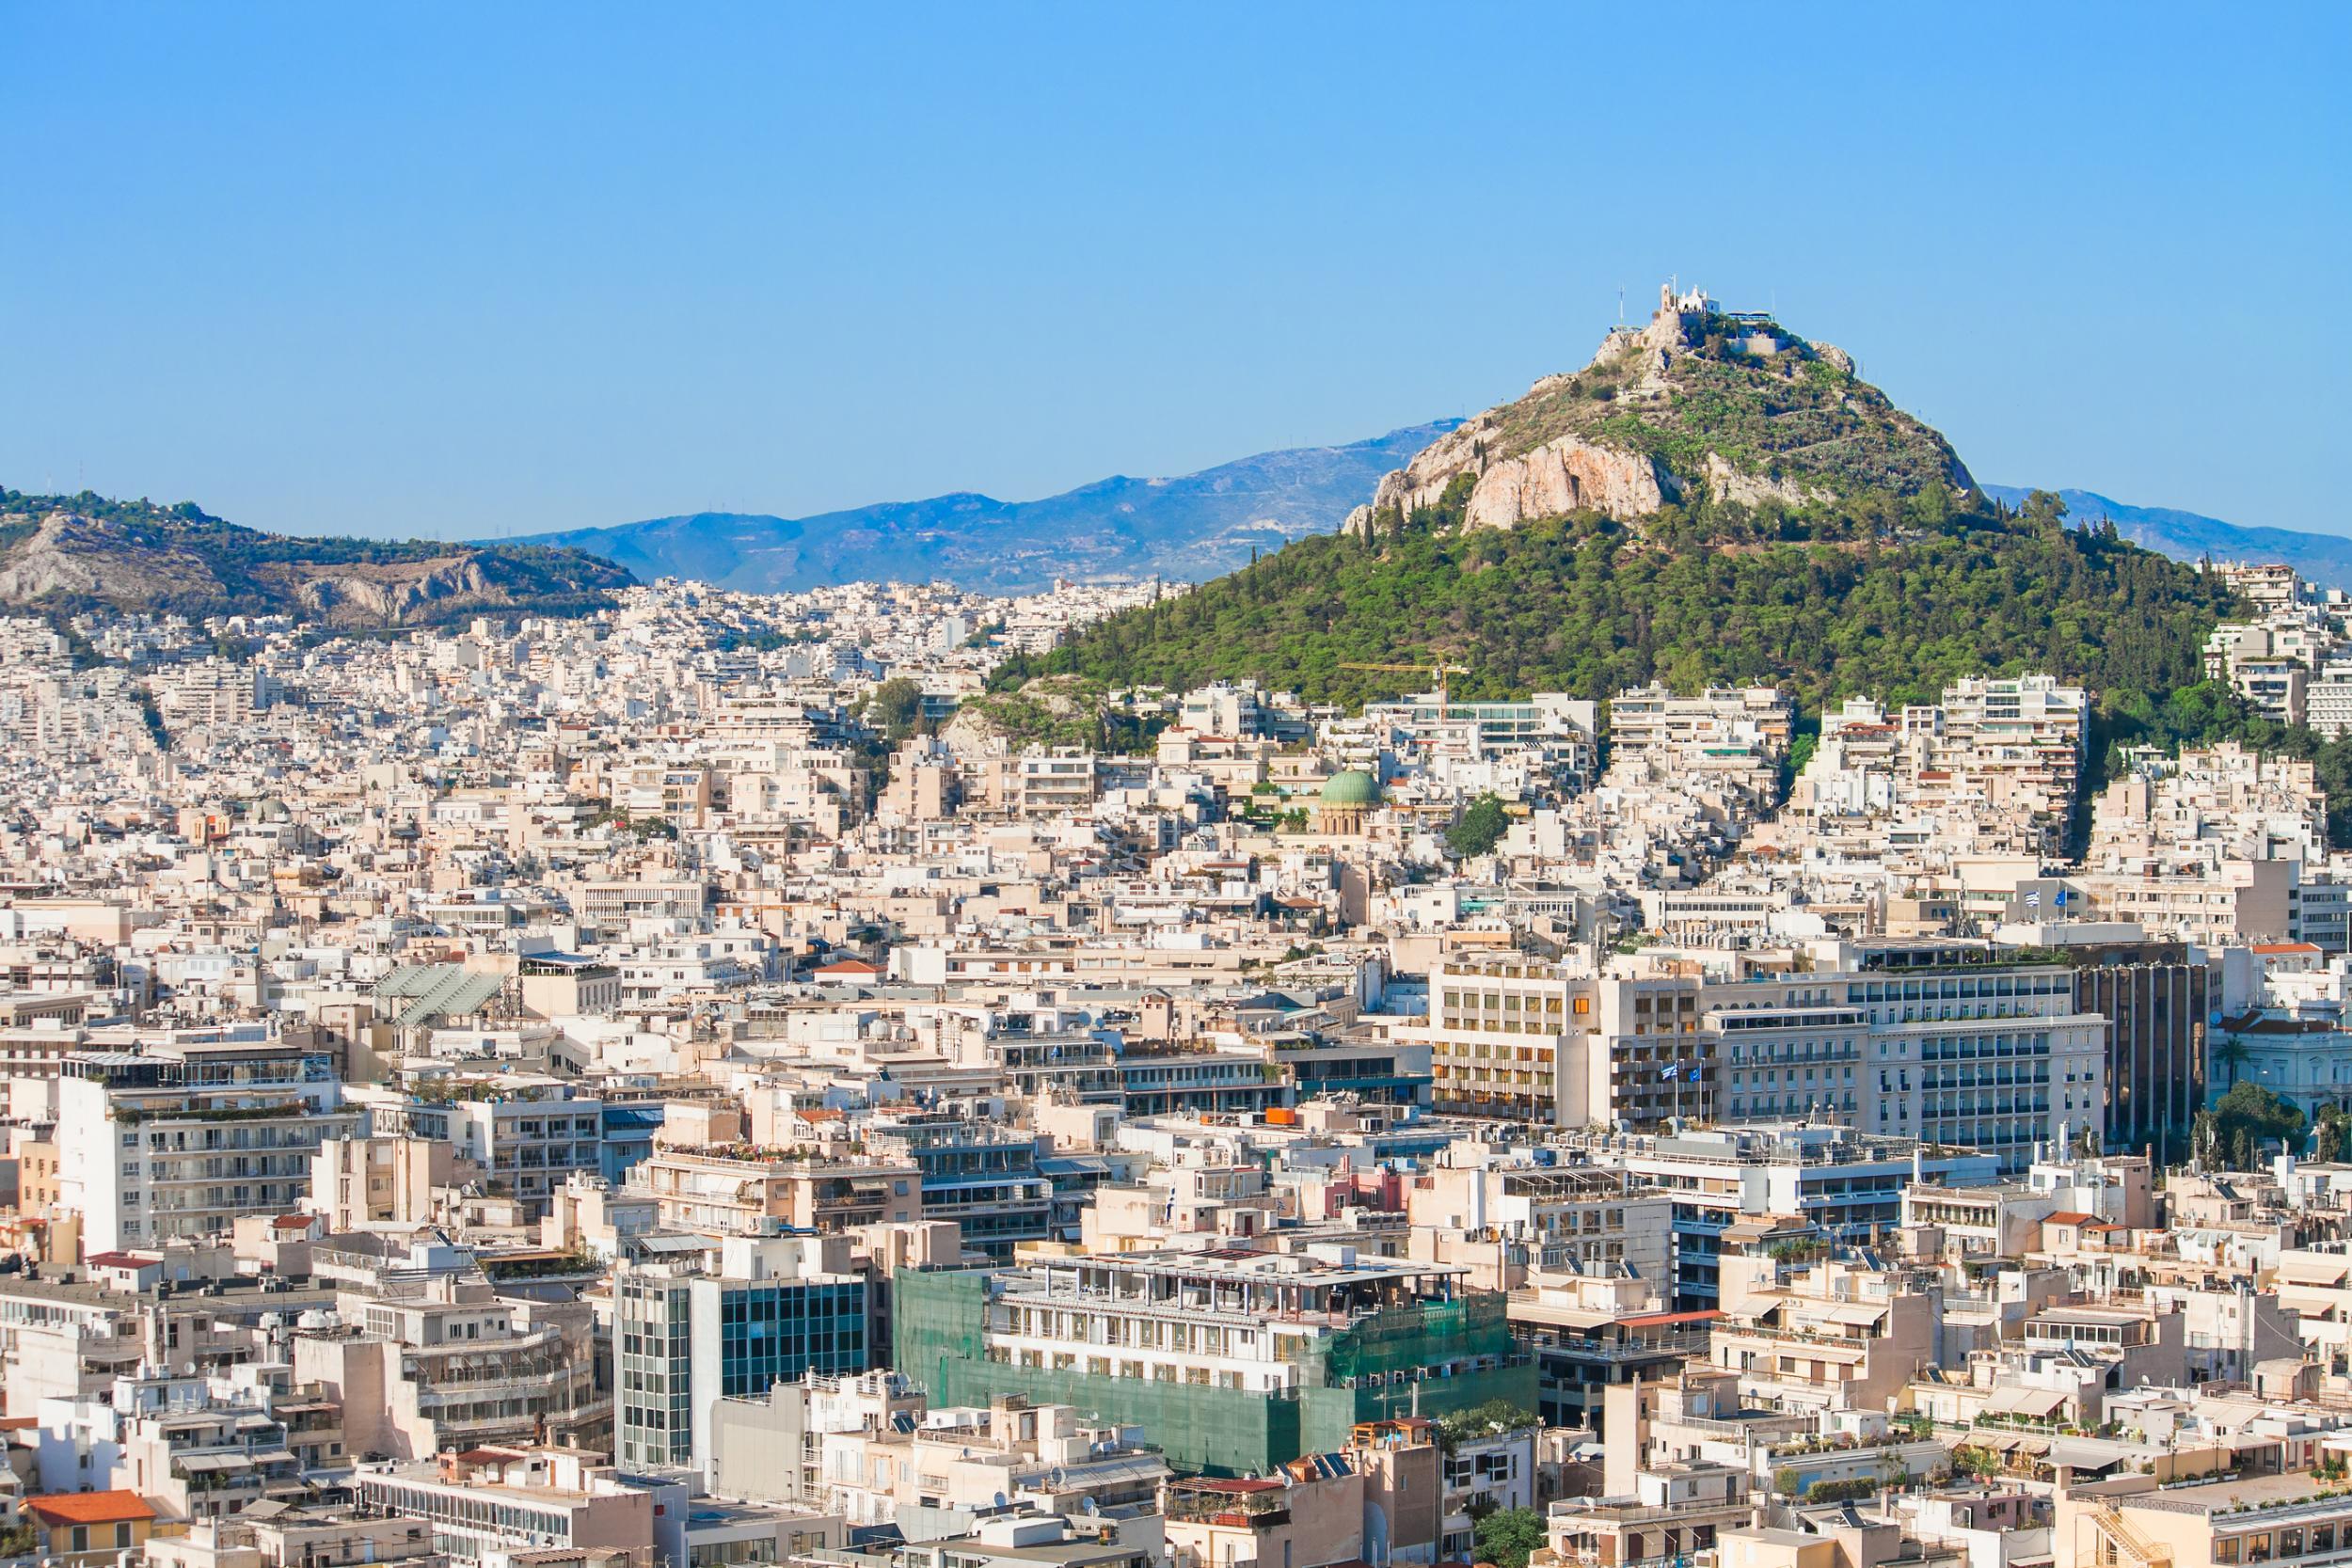 Take a hike up Mount Lycabettus for an overview of Athens - or, if you're feeling lazier, hitch a ride on the funicular